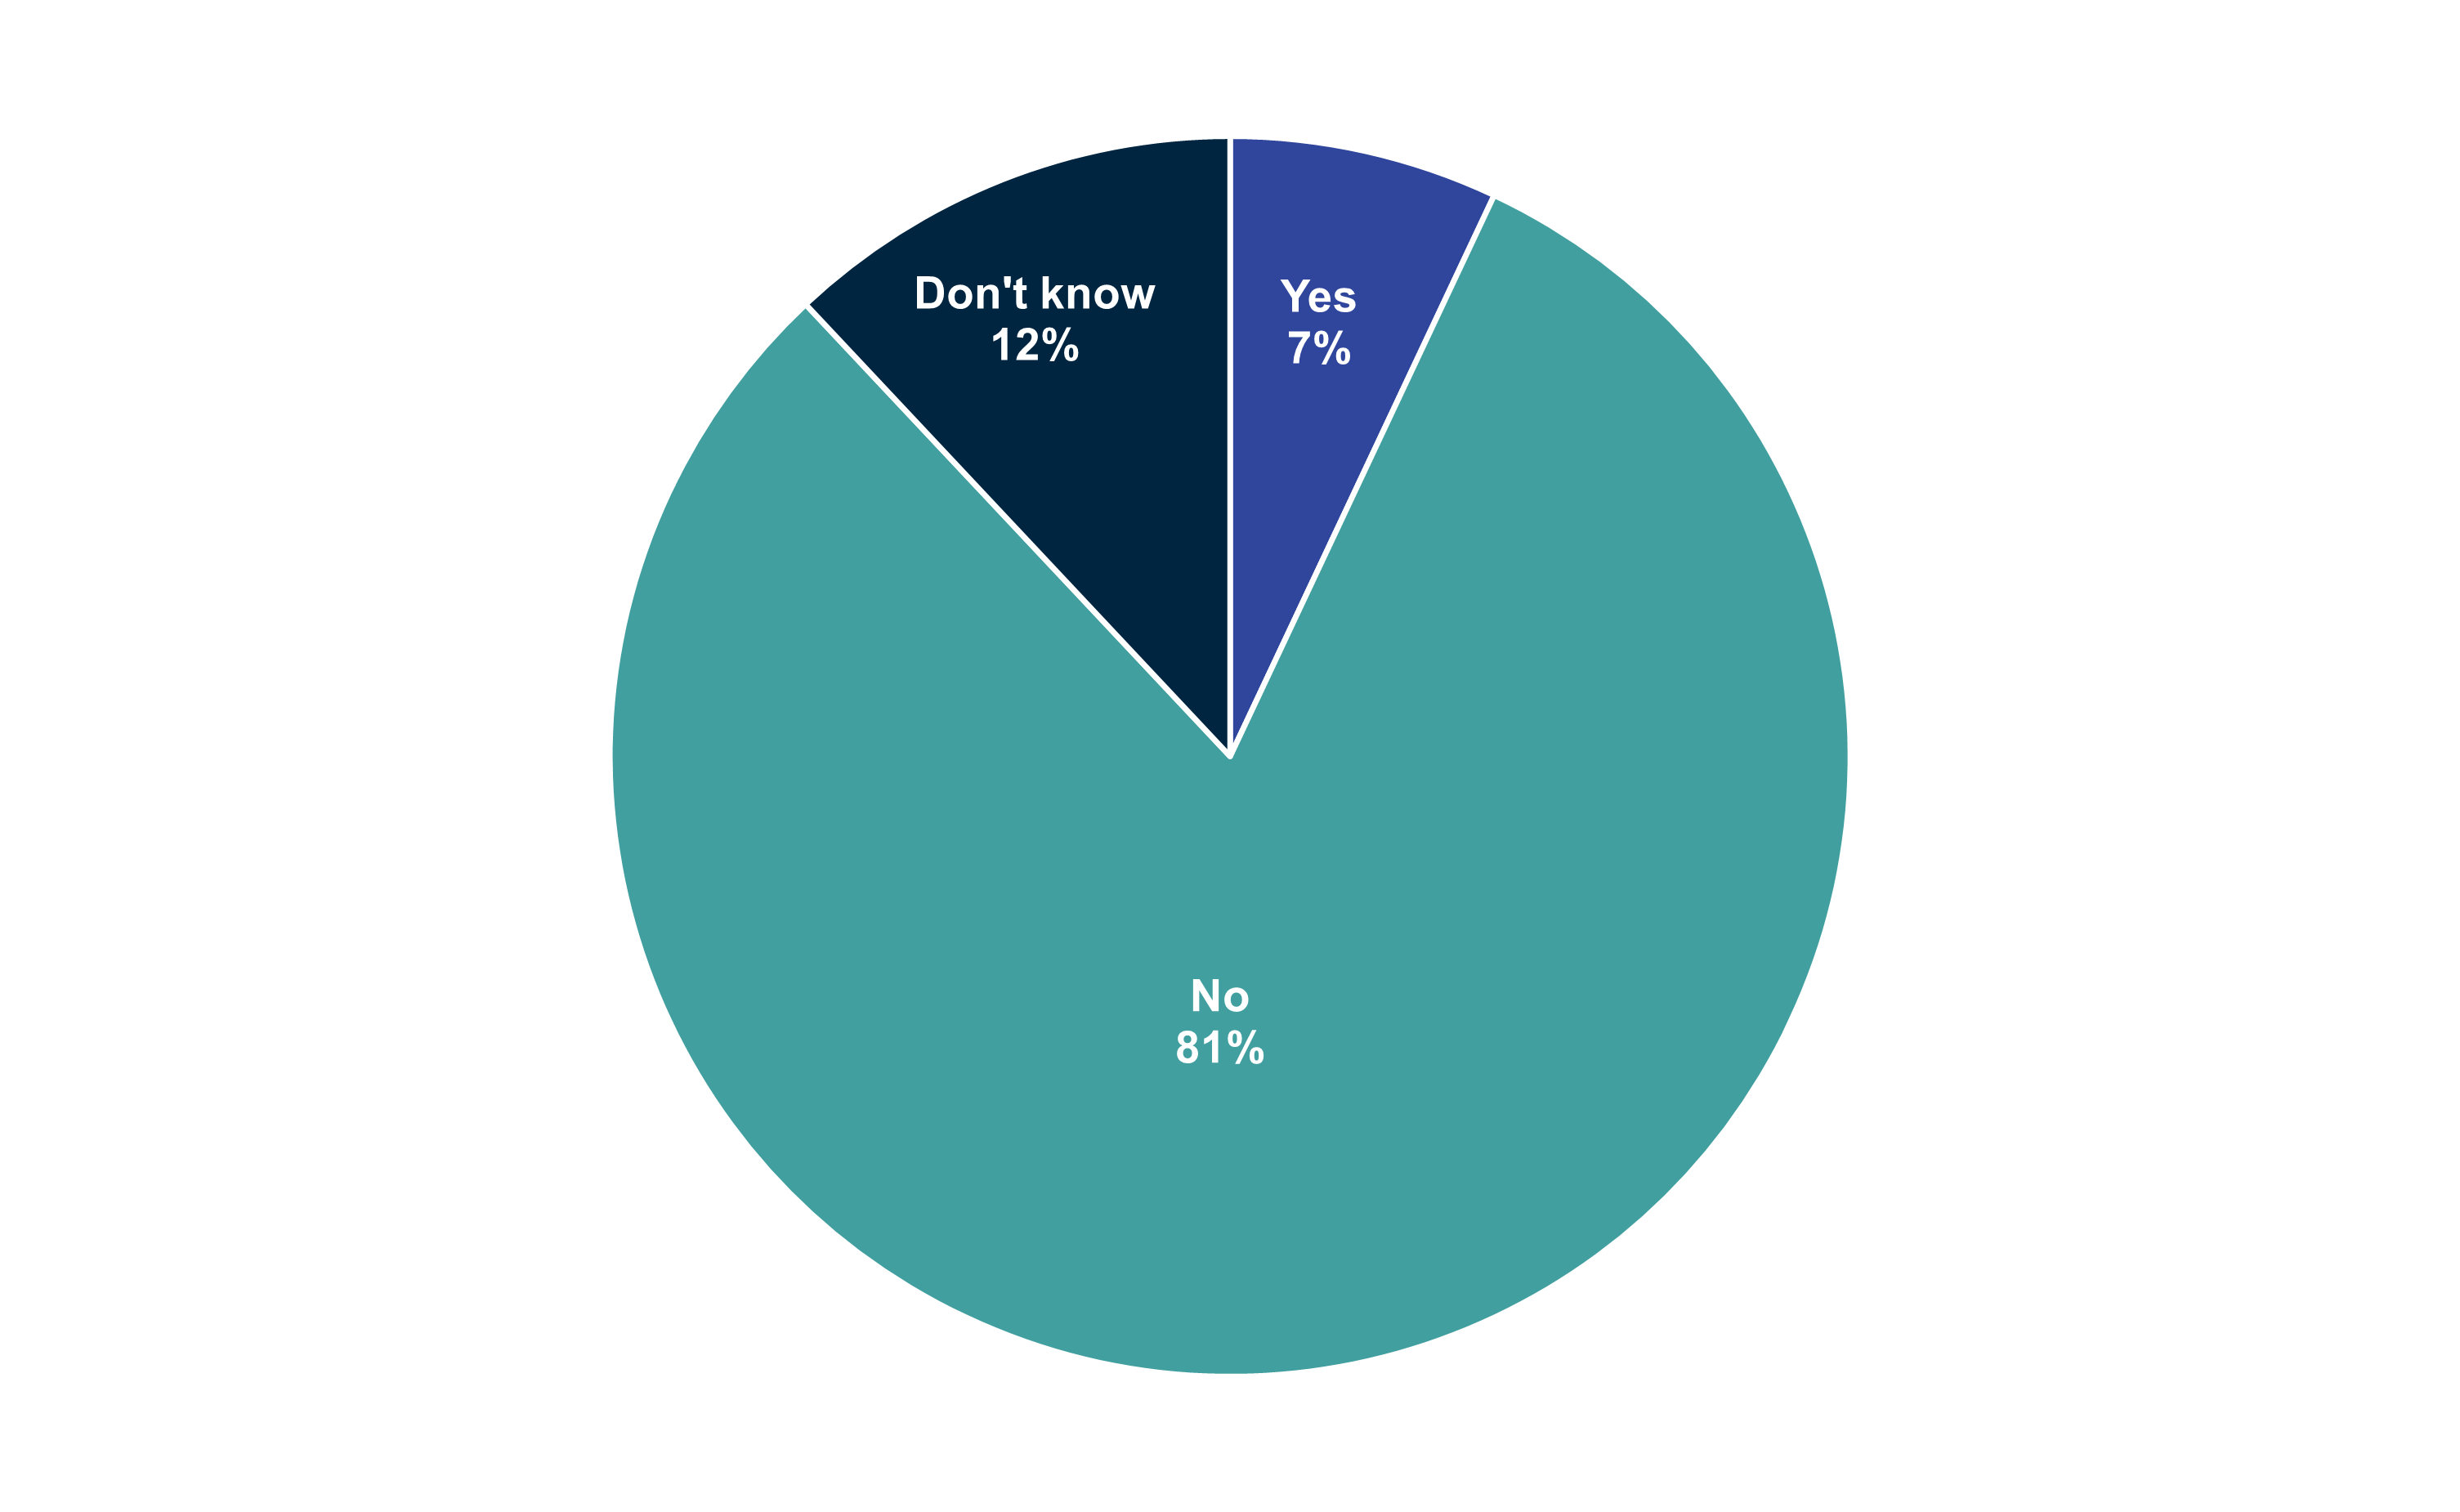 A pie chart showing whether adverts or promotions about gambling ever prompted young people to gamble. Options were 'Yes', 'No' or 'Don't know'. Data from the chart is provided within the following table.